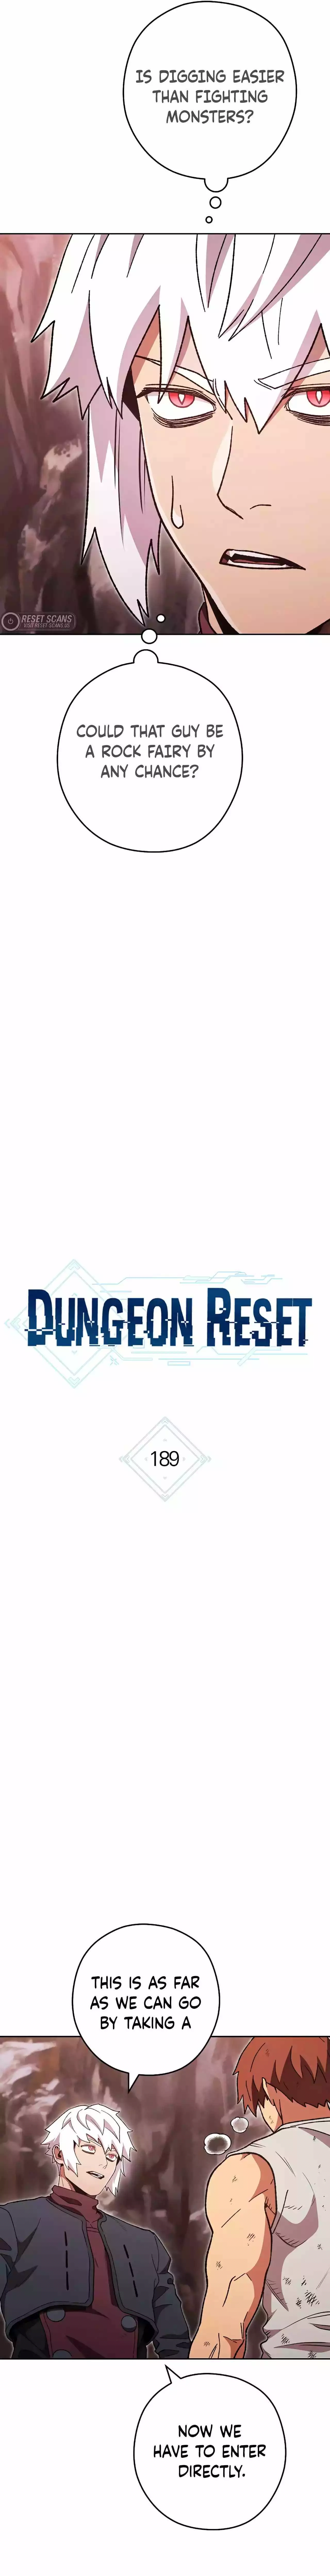 Dungeon Reset - 189 page 4-7b29662f